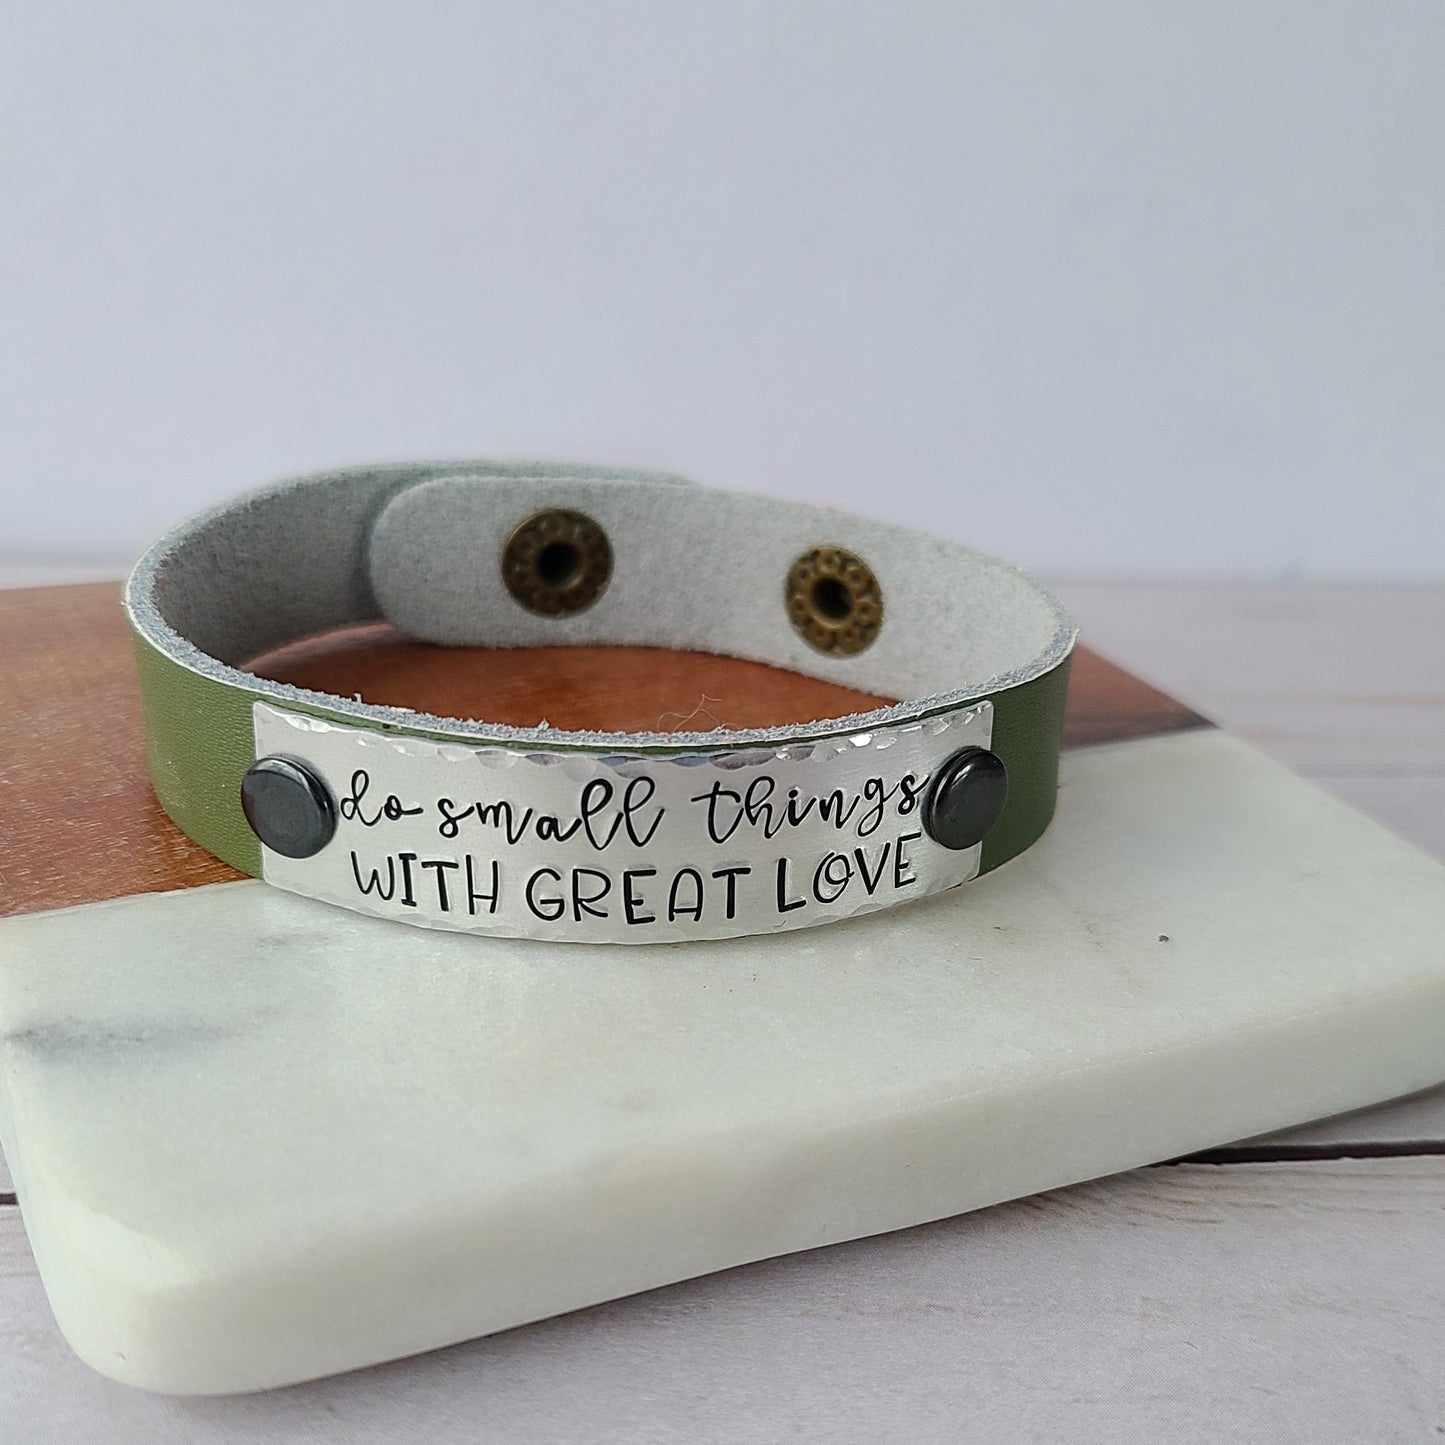 Do Small Things With Great Love - Olive Green Leather Cuff Bracelet